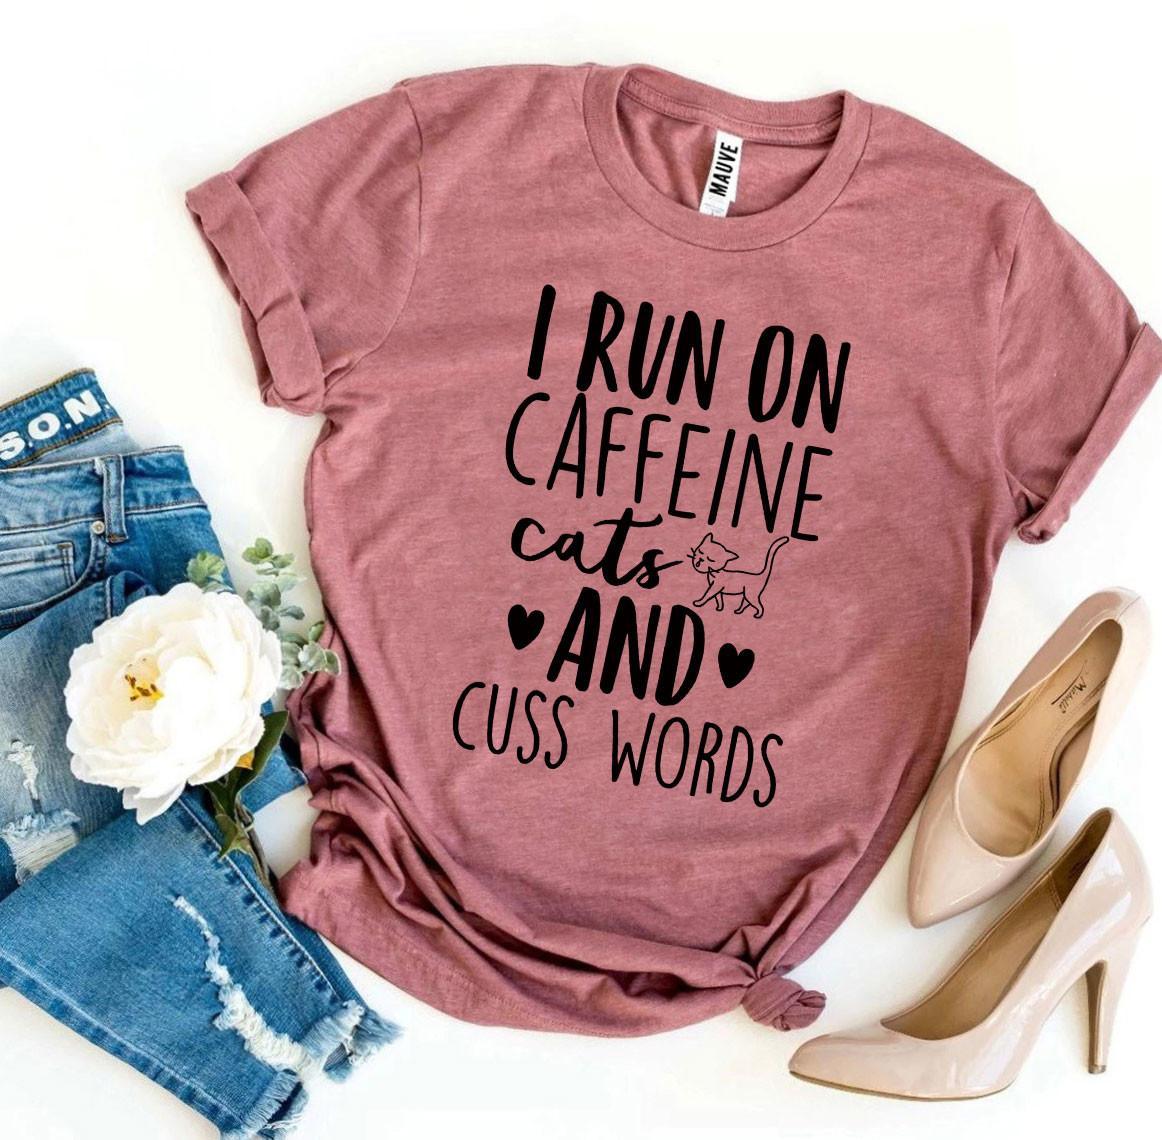 I Run On Caffeine Cats And Cuss Words T-shirt - VirtuousWares:Global